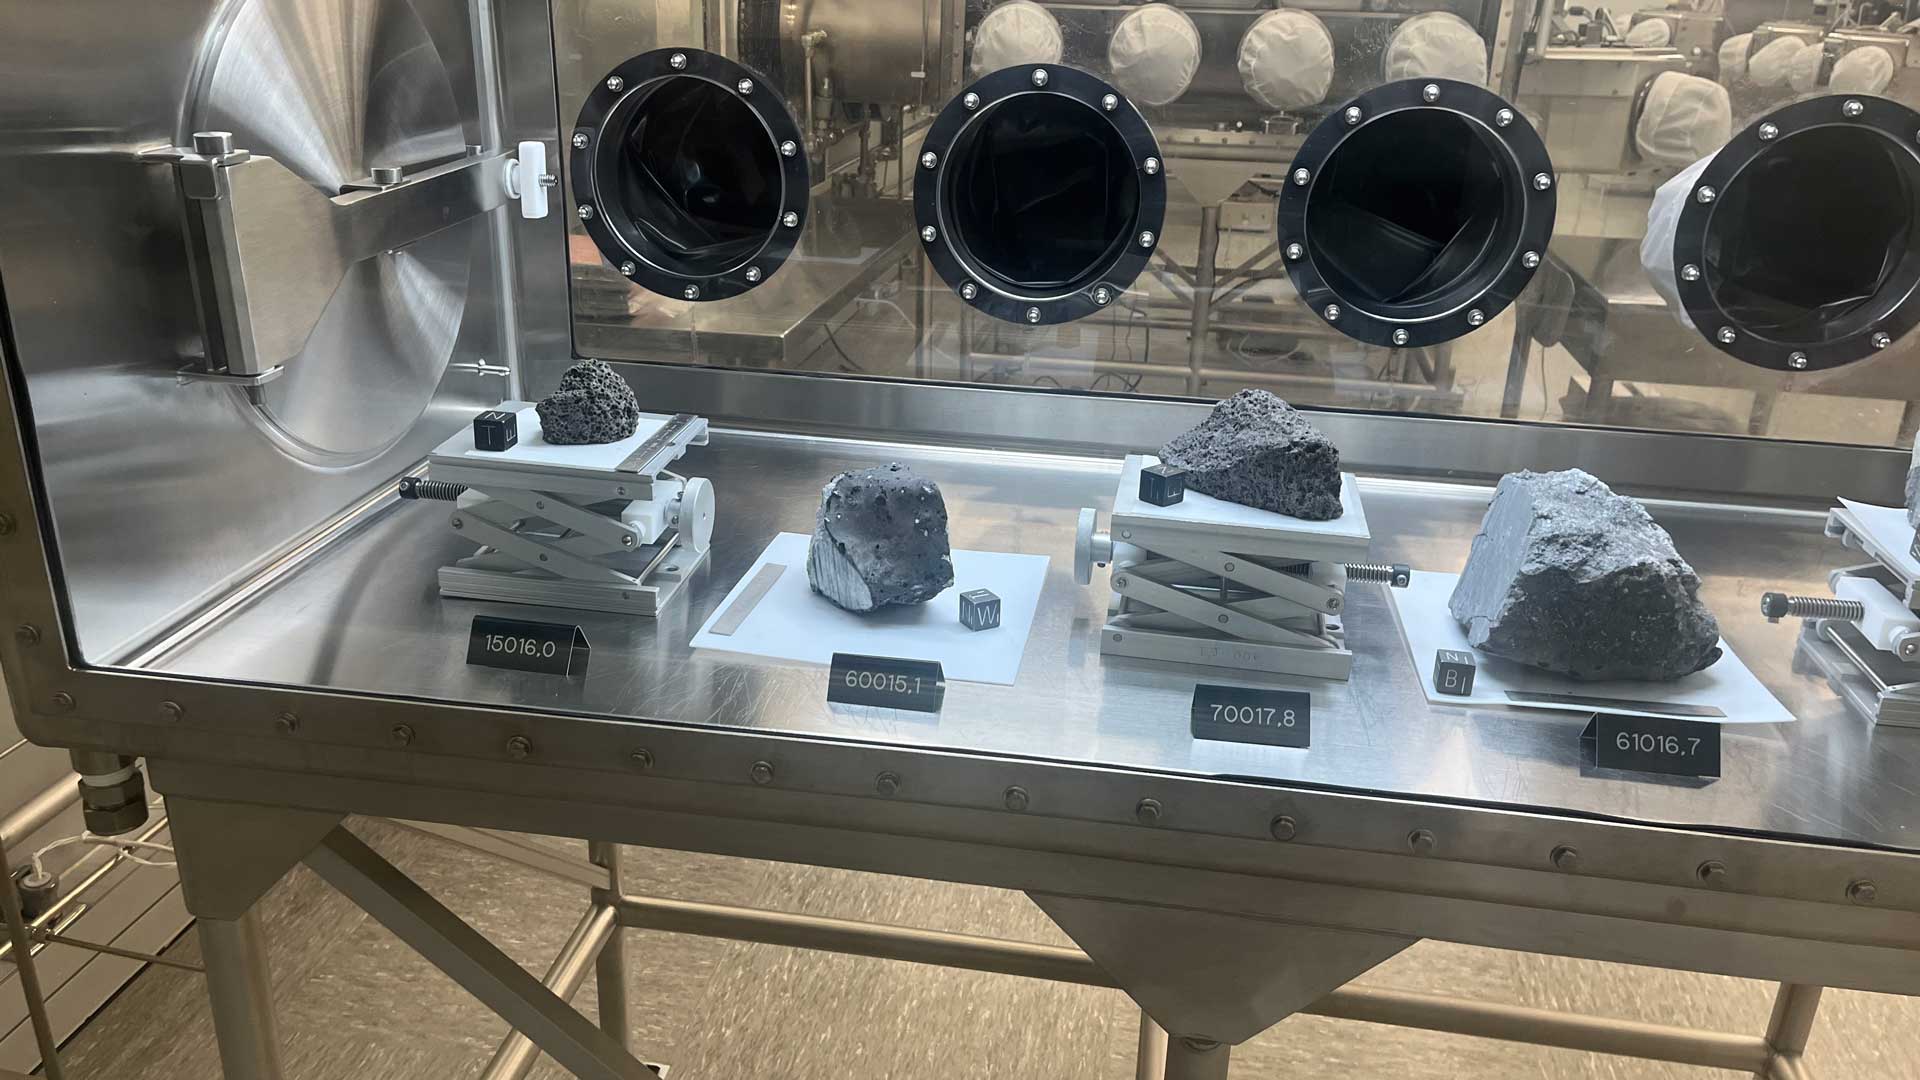 Moon rocks from the Apollo era being studied at NASA's astrobiology lab in Houston, TX.